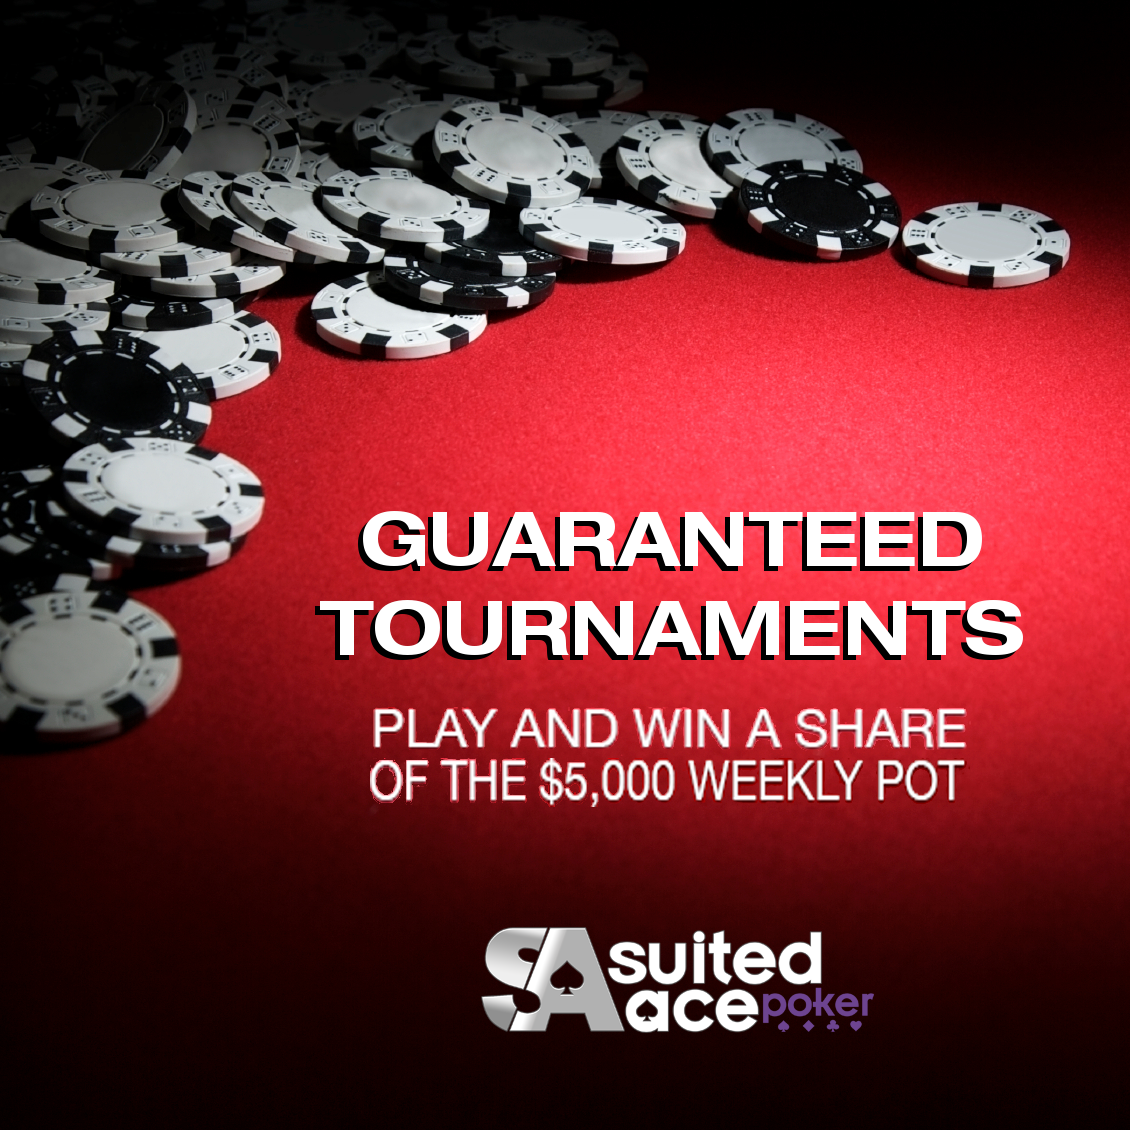 Play and win a share of the $5,000 weekly pot.